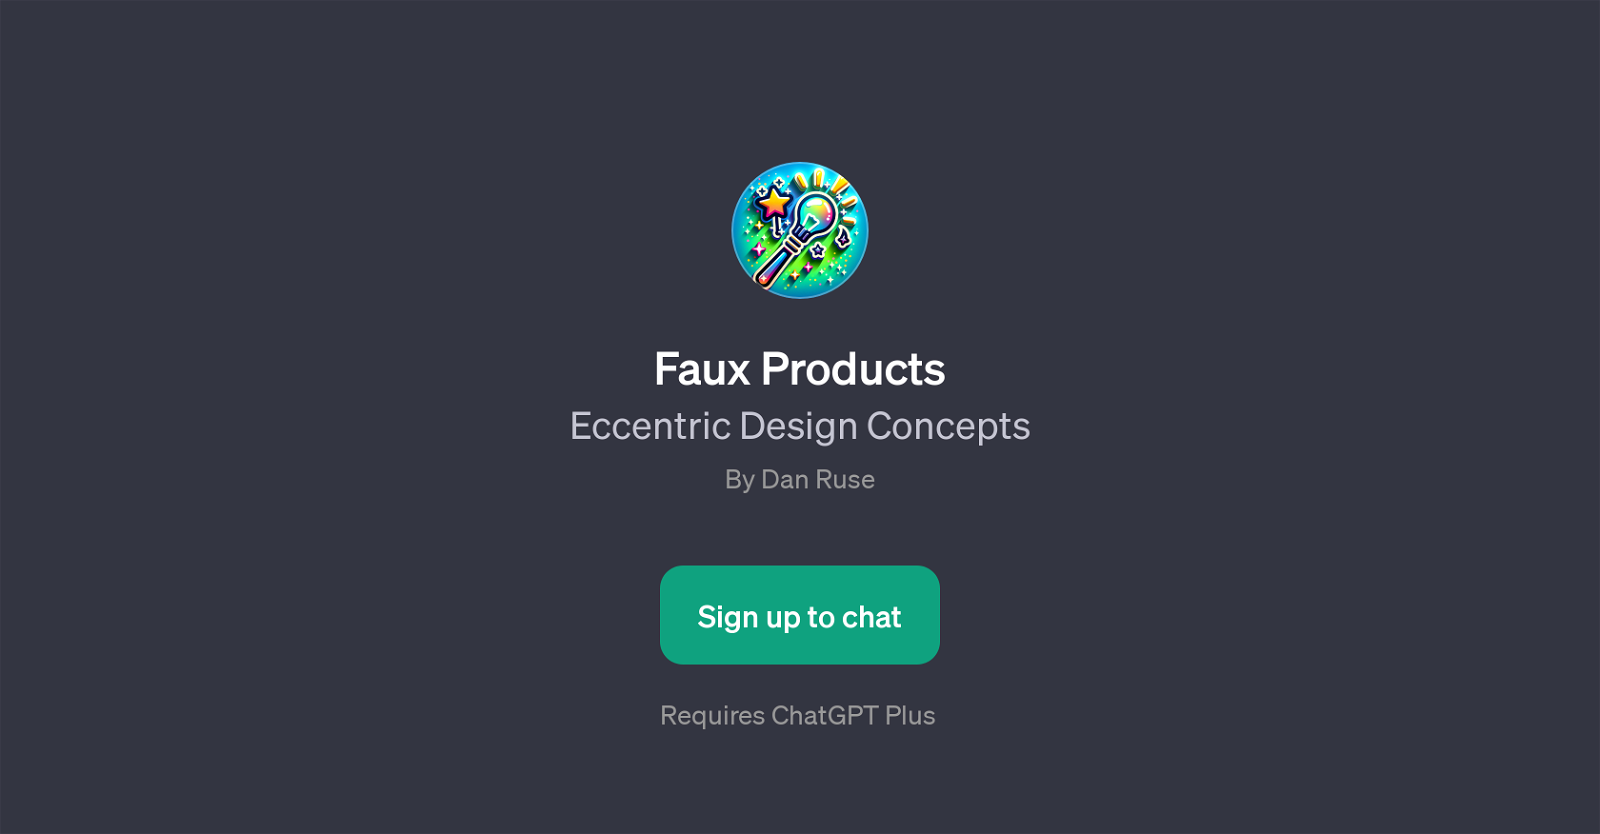 Faux Products website